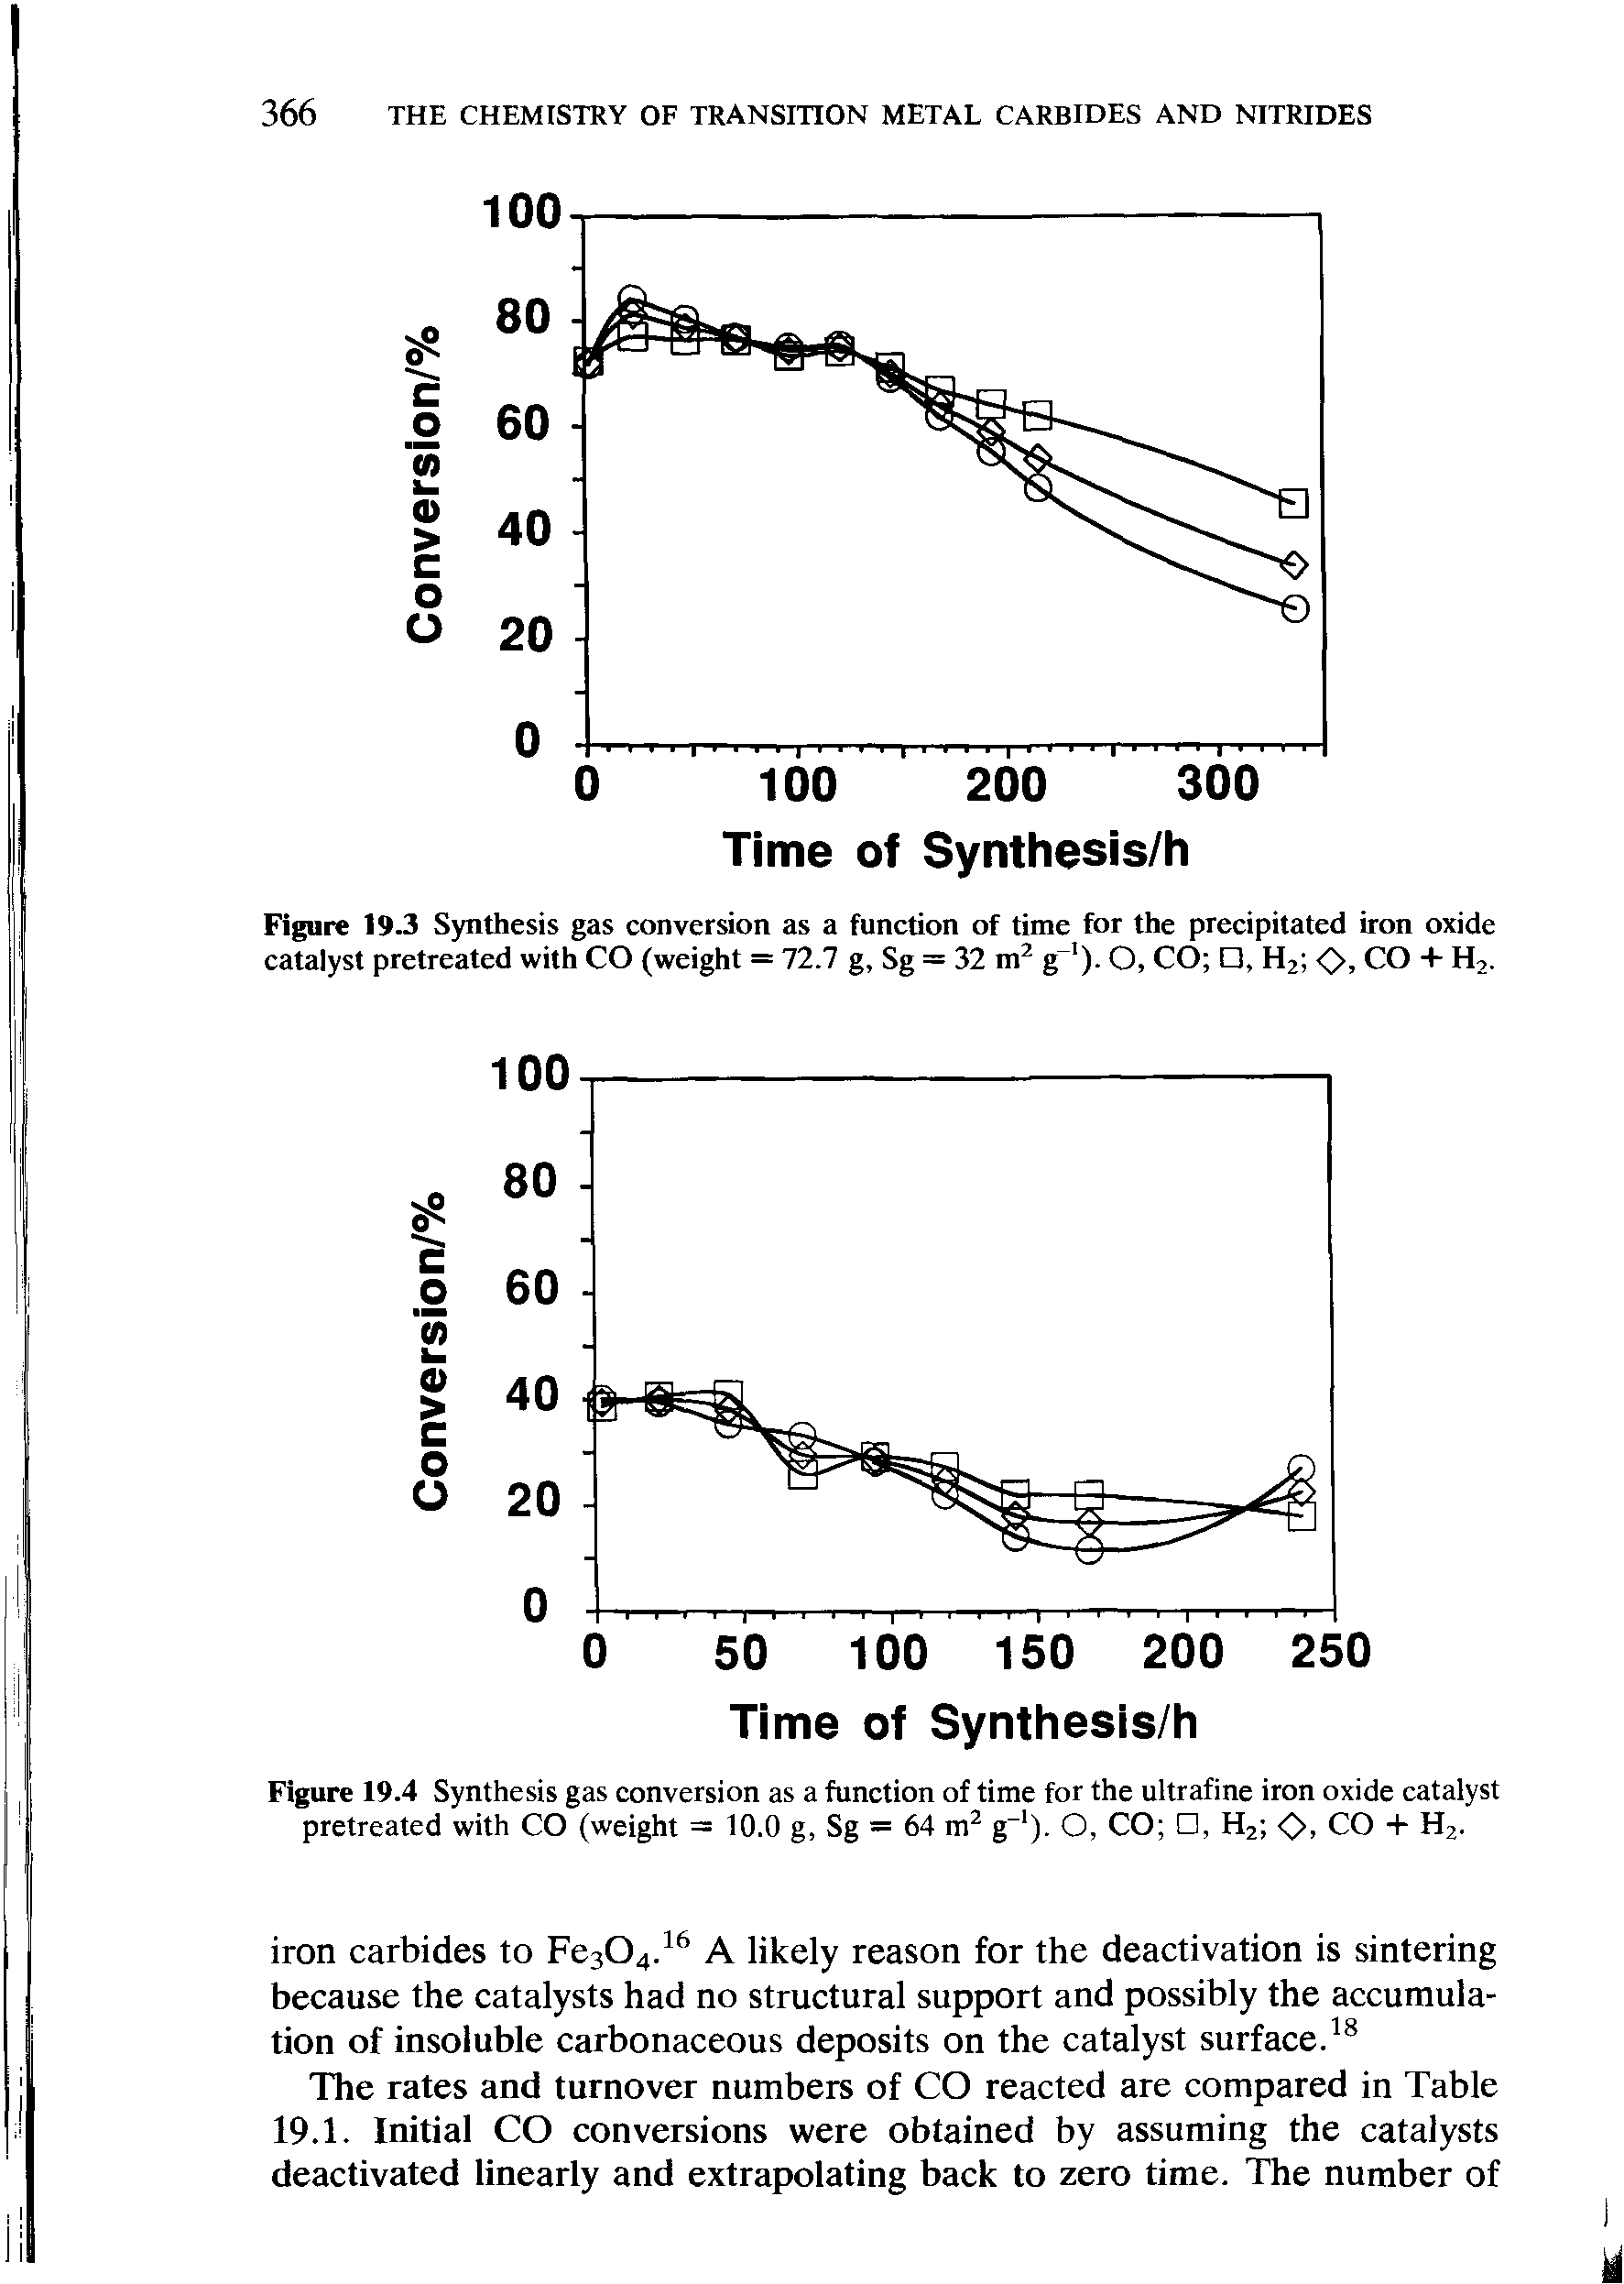 Figure 19.4 Synthesis gas conversion as a function of time for the ultrafine iron oxide catalyst pretreated with CO (weight = 10.0 g, Sg = 64 m2 g-1). O, CO , H2 0> CO + H2.